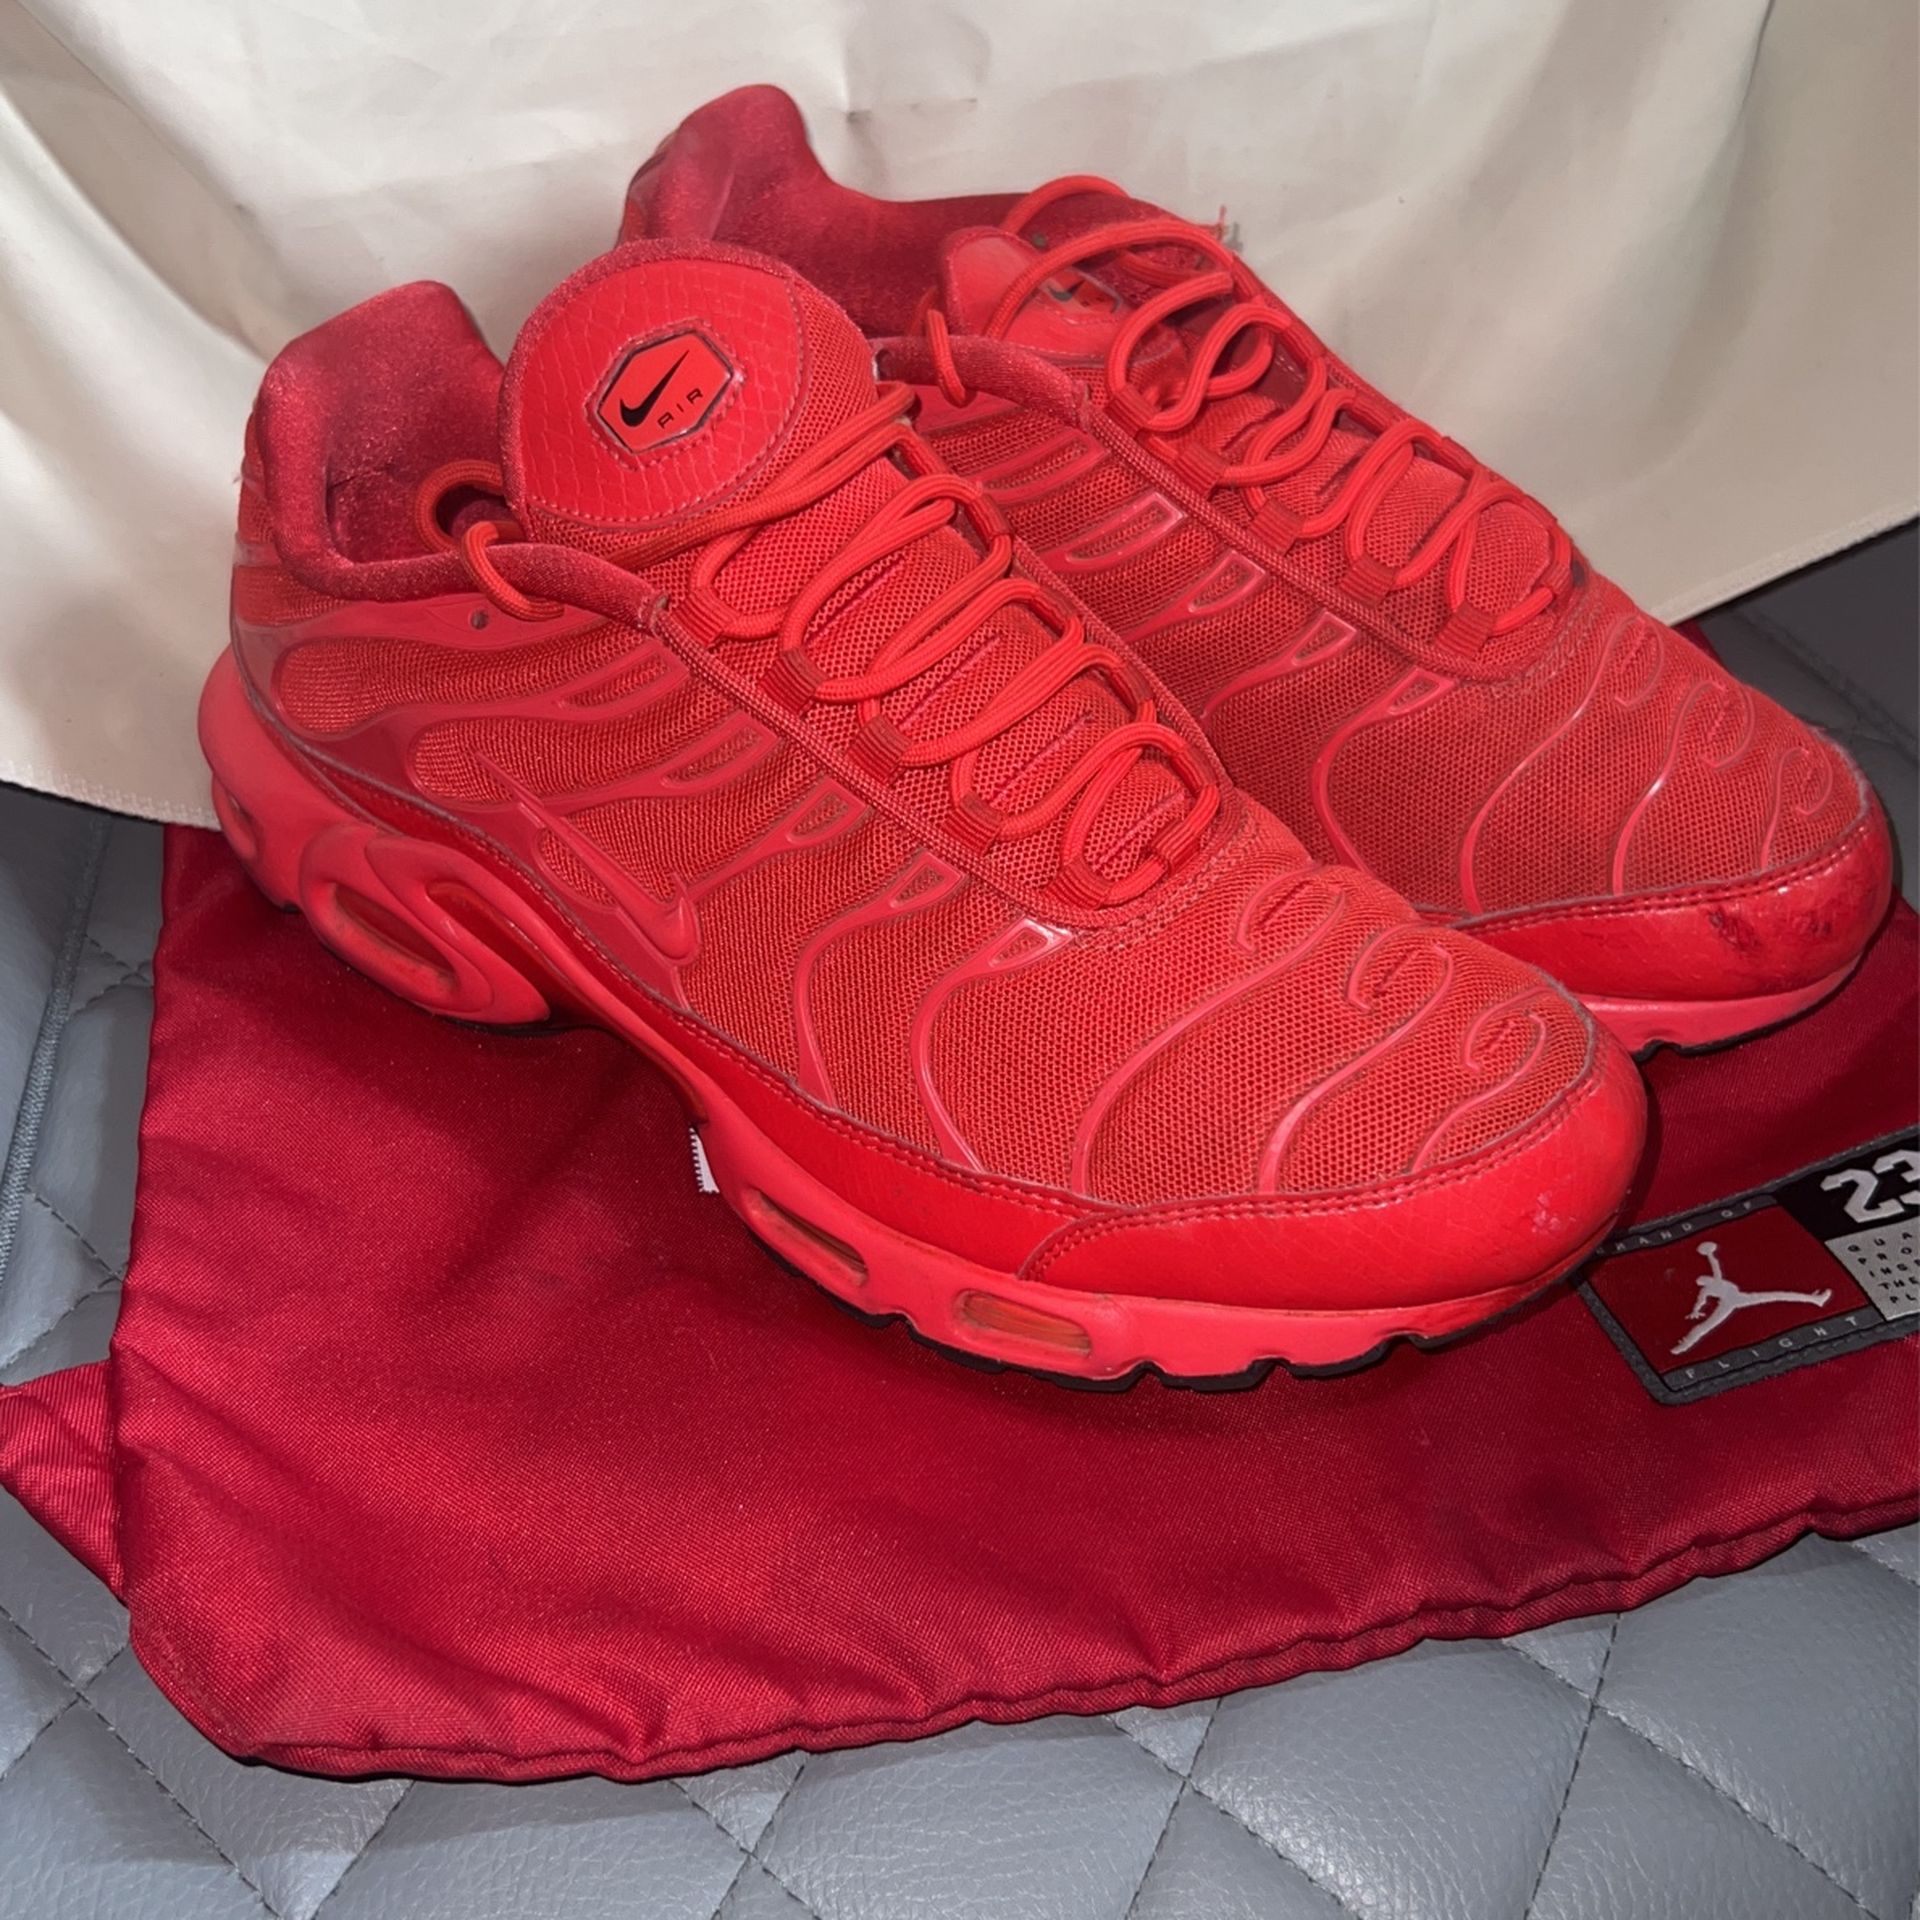 Triple Red Airmax TN Plus By Nike Size 12